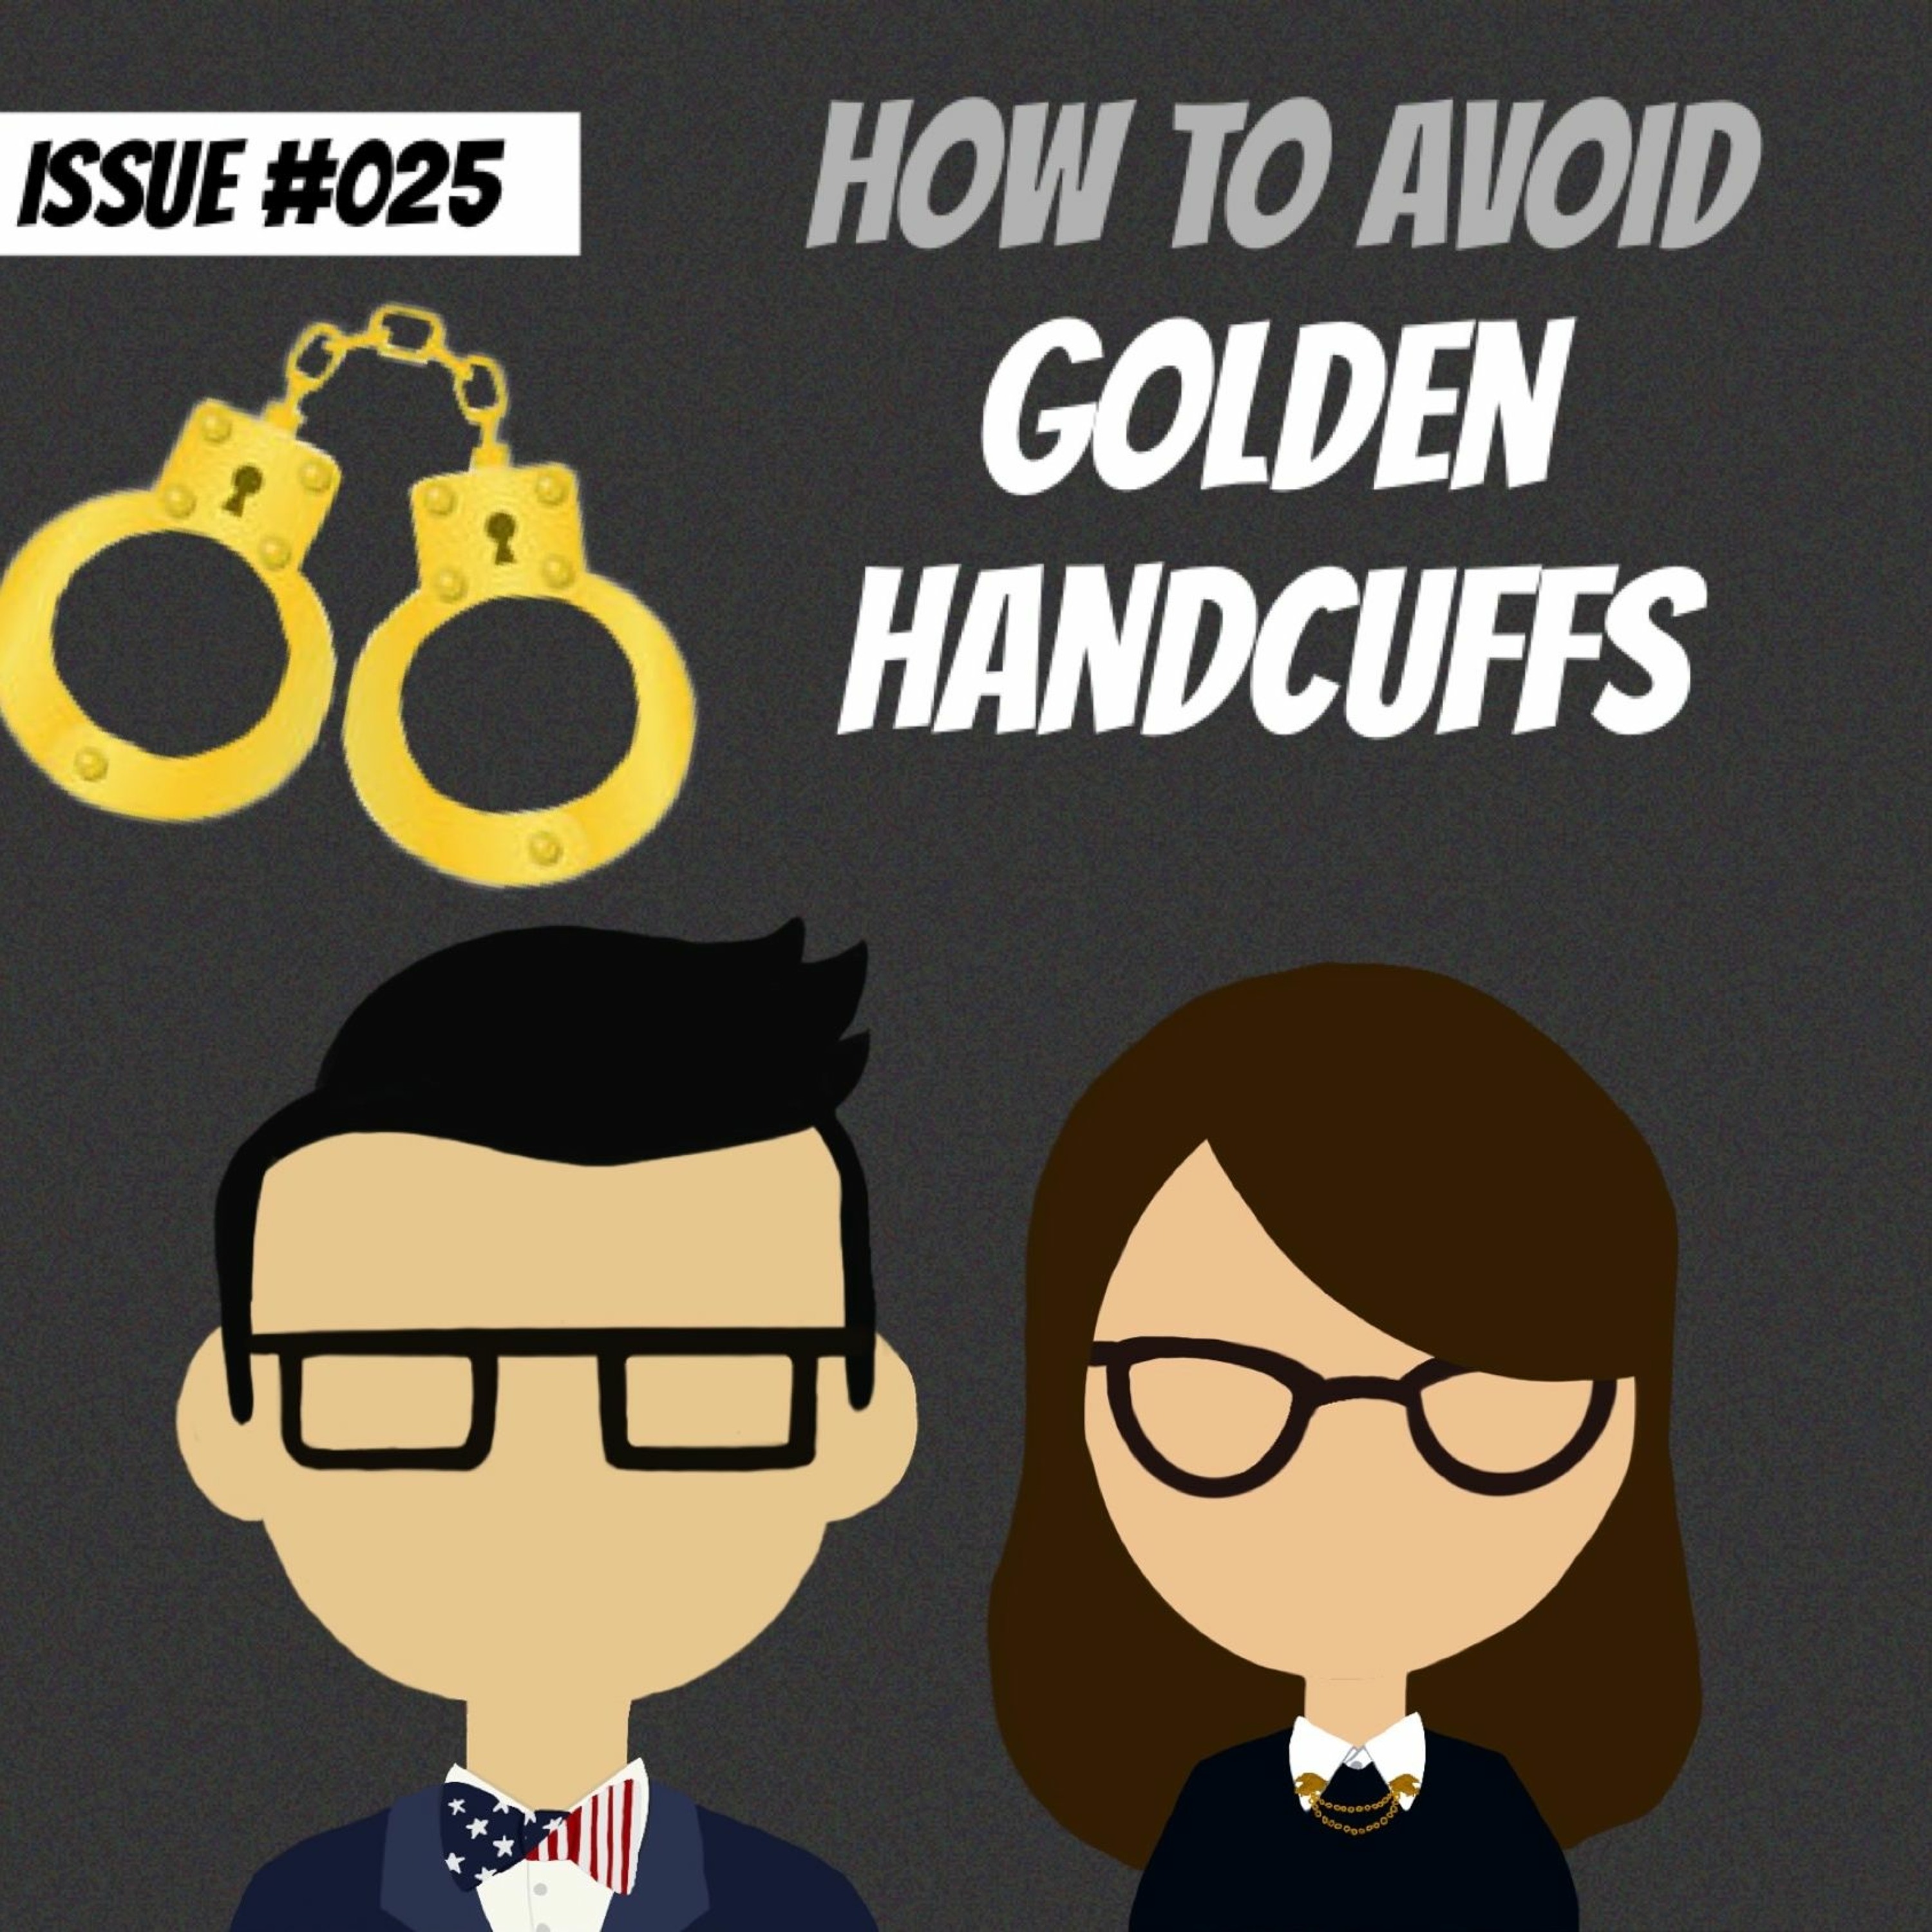 Career Advice: How to avoid ”Golden Handcuffs”